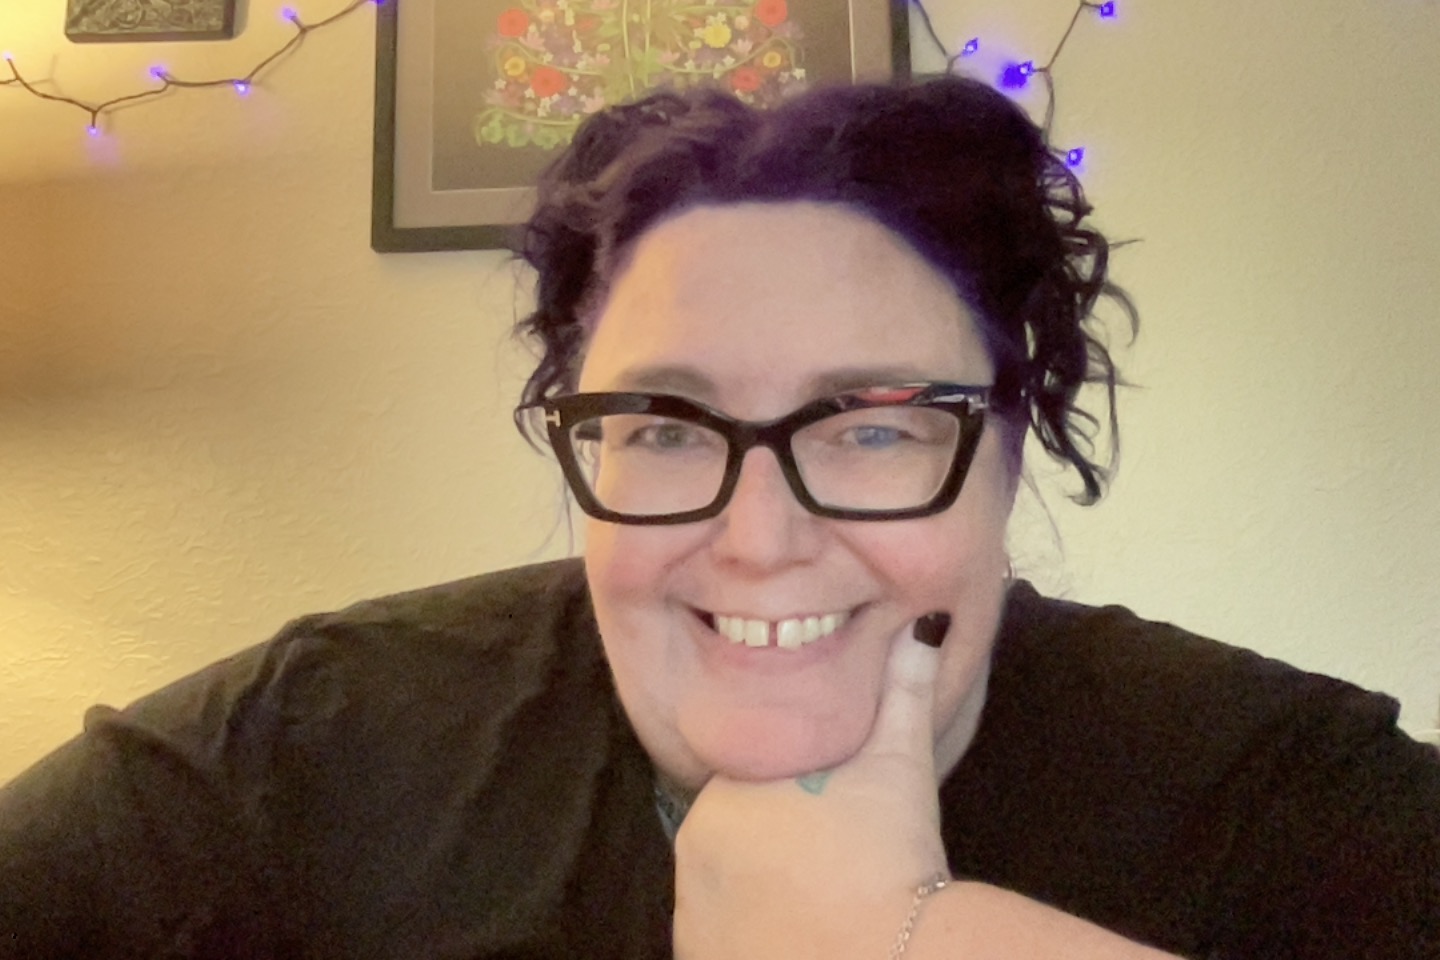 fat white woman's face. leaning on her chin. black glasses. purple hair up in pigtails.